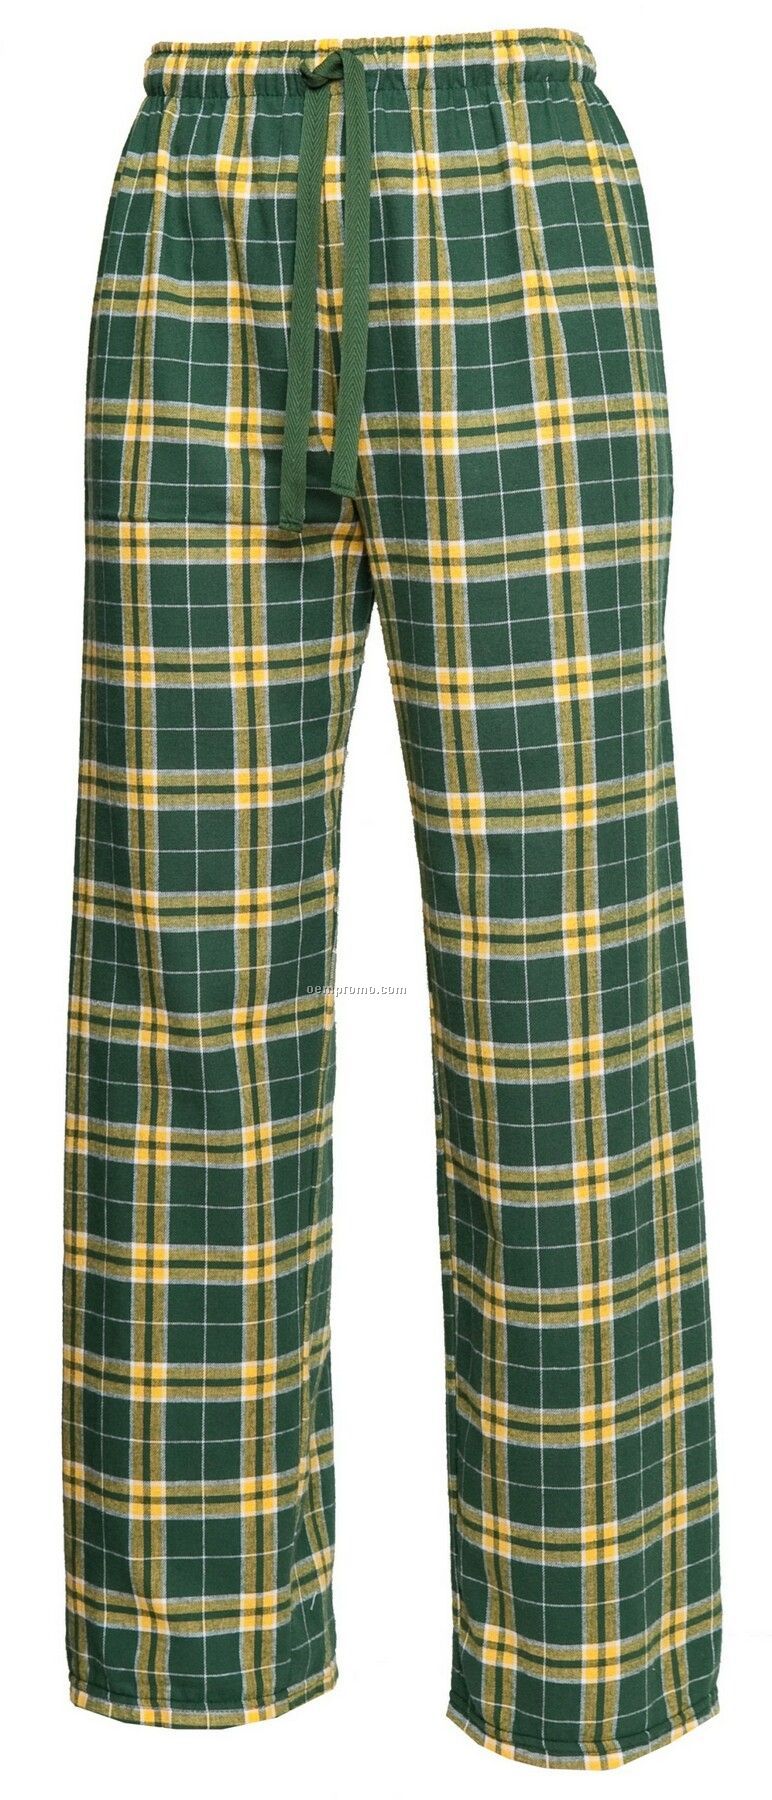 Youth Team Pride Flannel Pant In Green & Gold Plaid